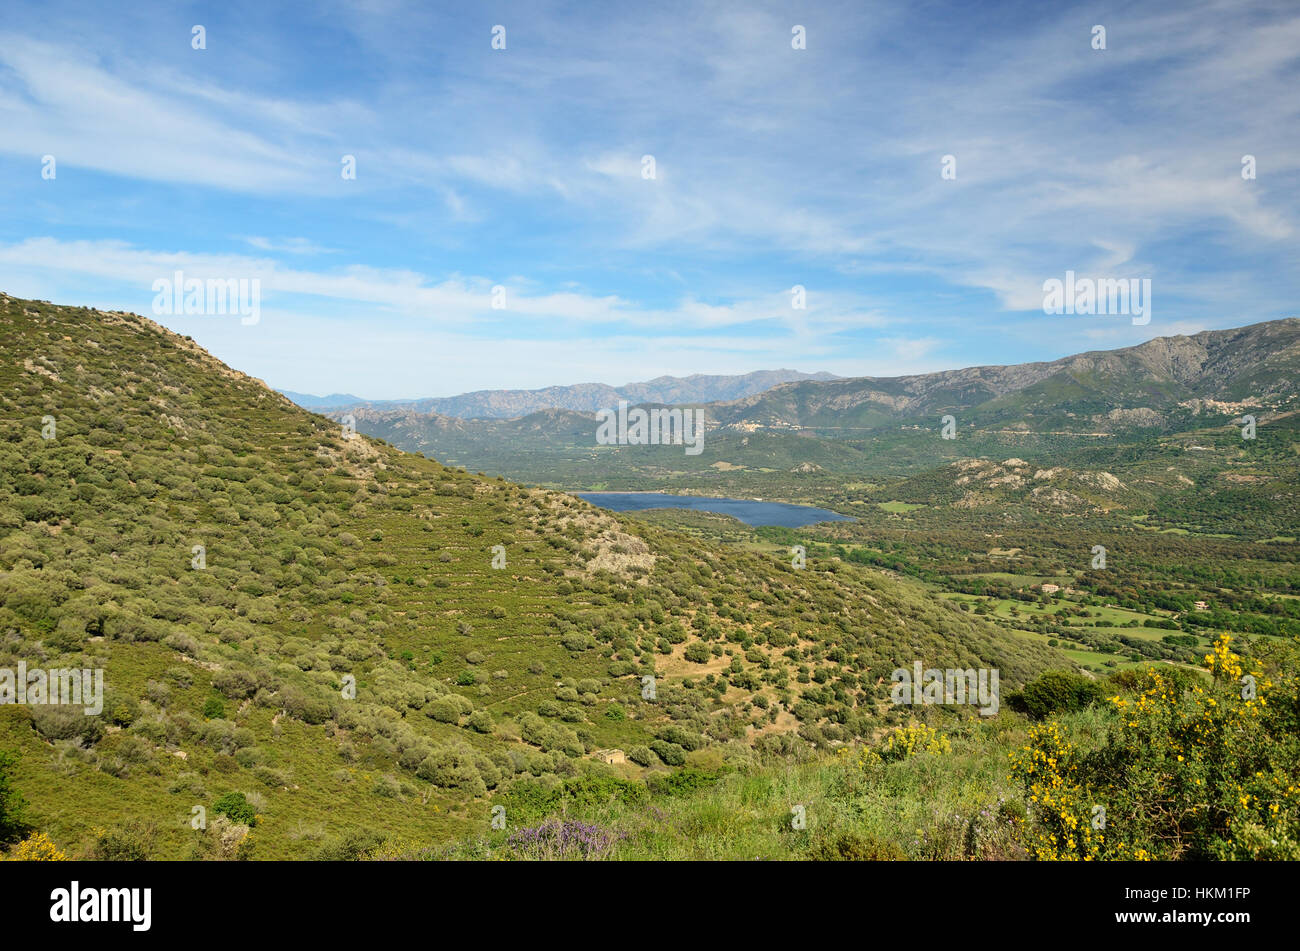 Balagne is also called the garden of Corsica. In the foreground there is a flat hill covered with maguis. There are a fertile plain with fields and re Stock Photo